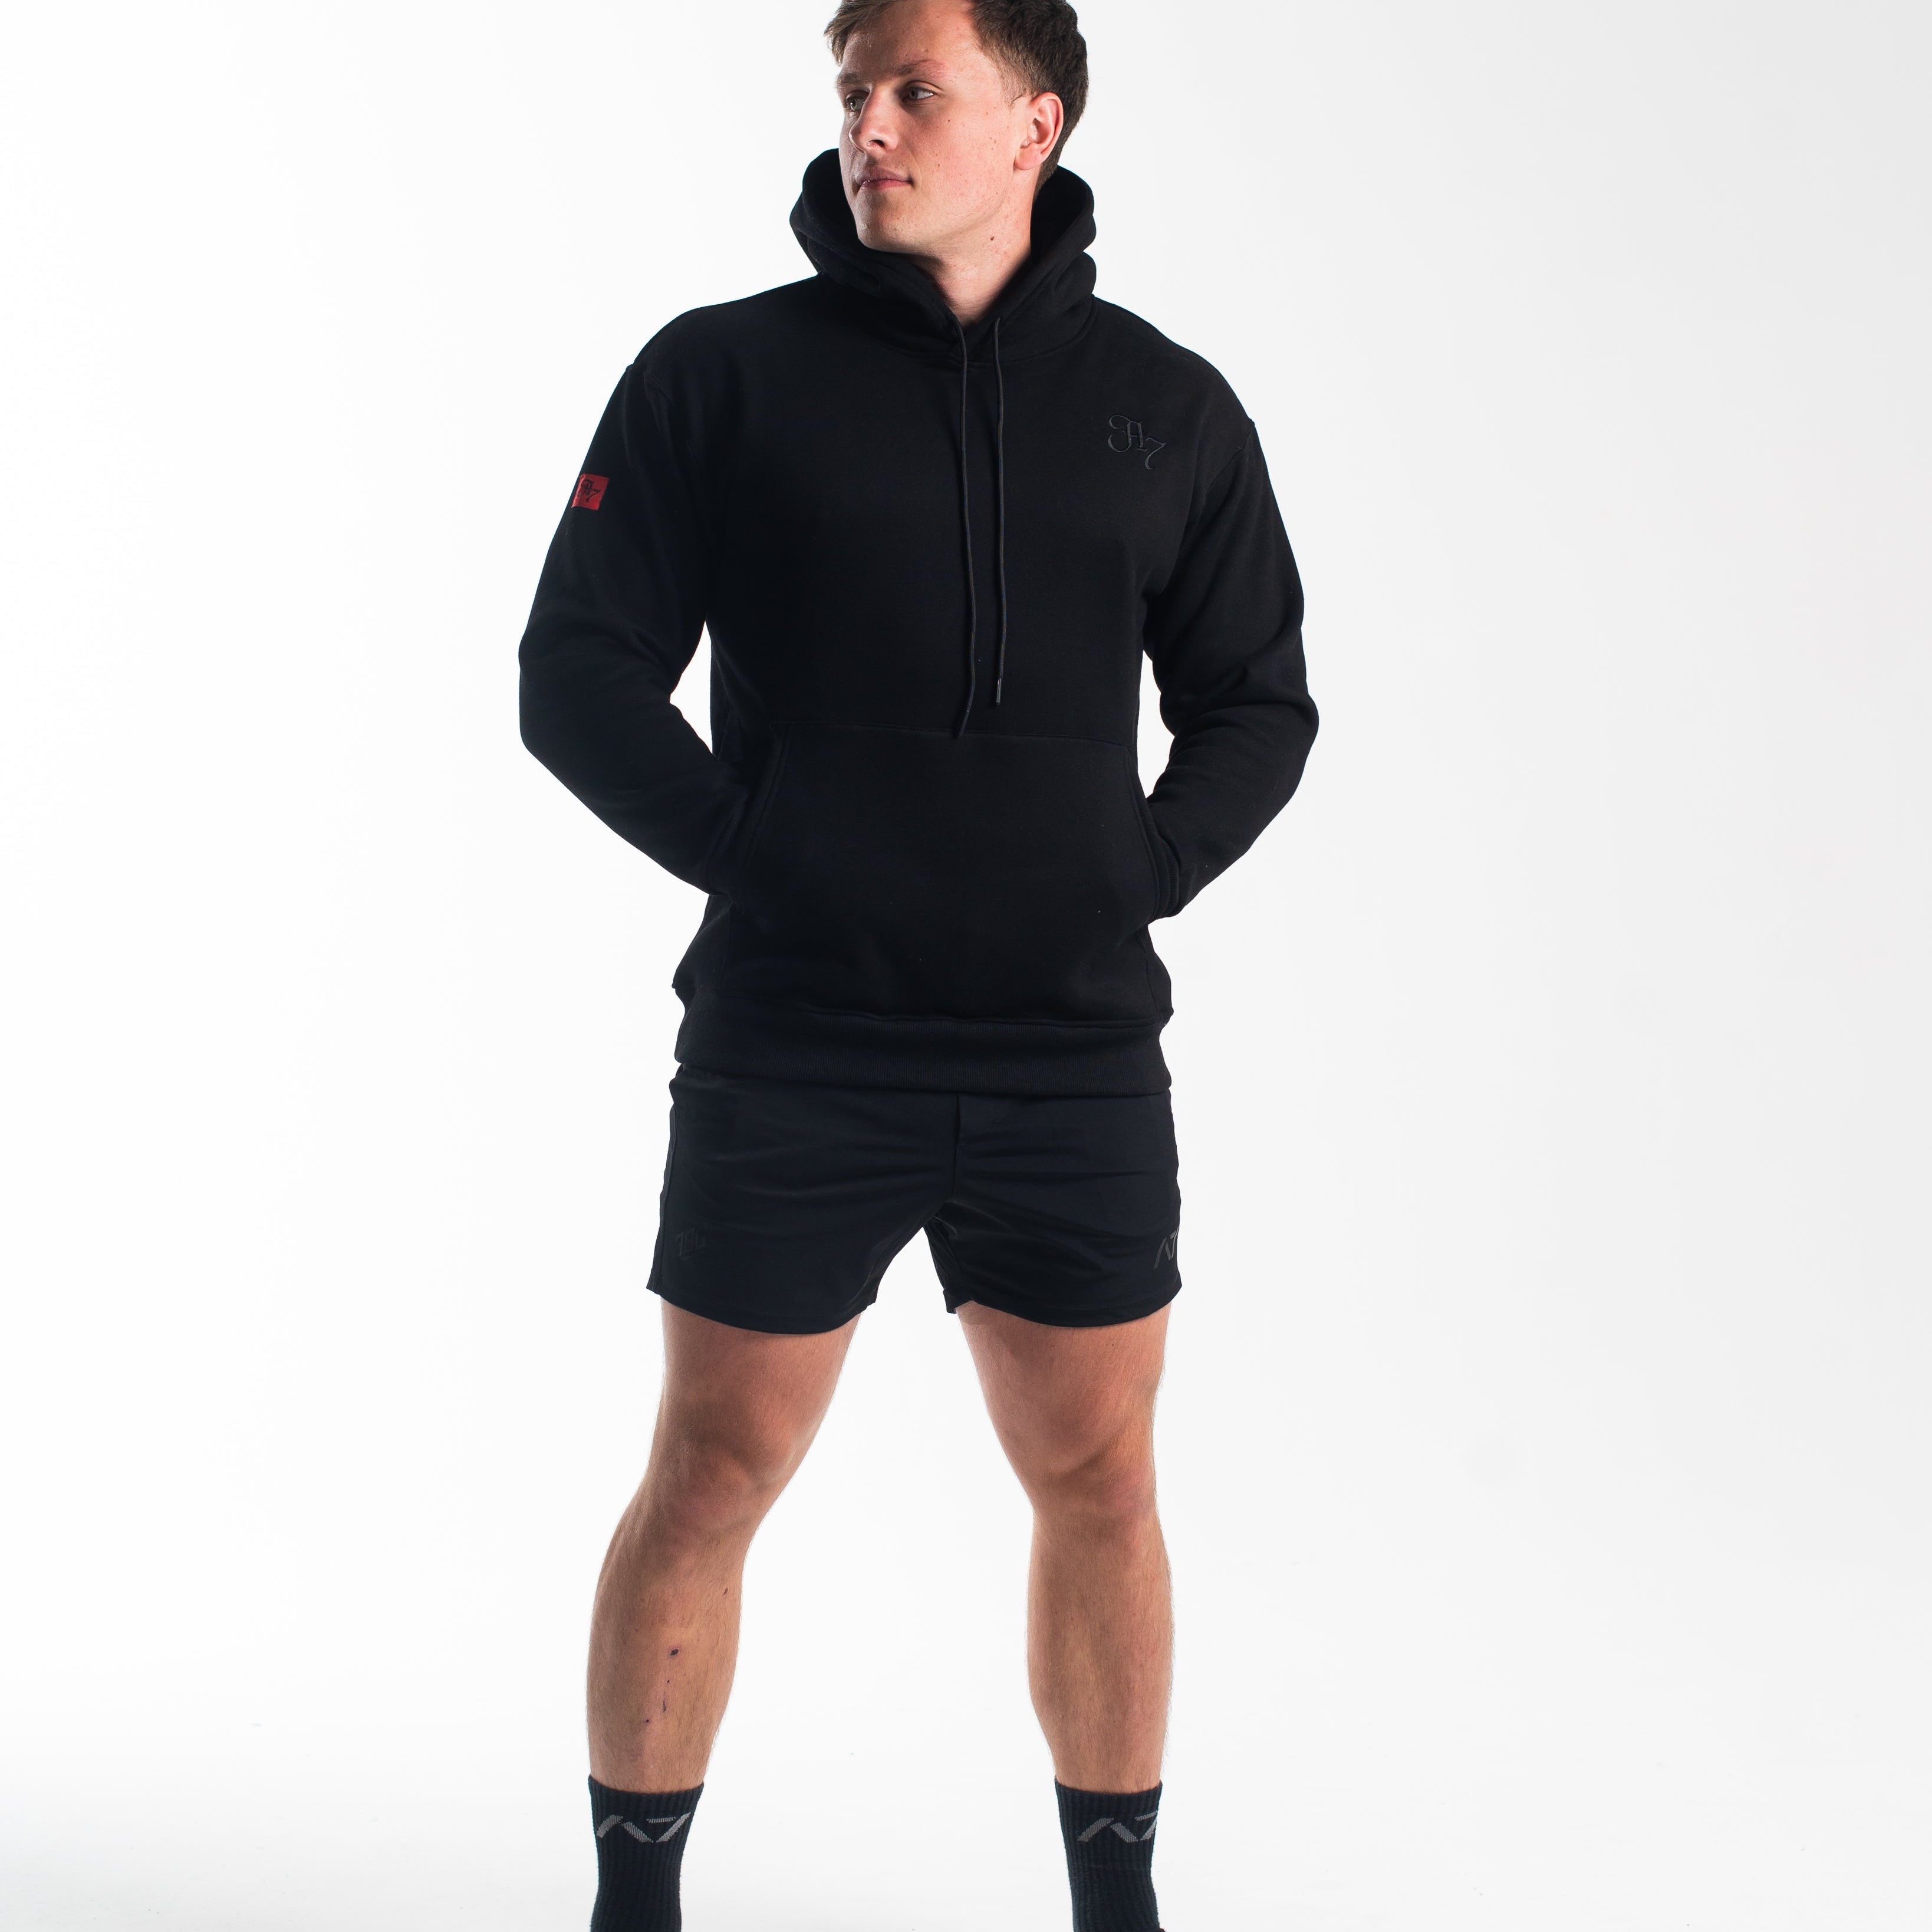 360GO was created to provide the flexibility for all movements in your training while offering comfort. These shorts offer 360 degrees of stretch in all angles and allow you to remain comfortable without limiting any movement in both training and life environments. Designed with a wide drawstring to easily adjust your waist without slipping. Purchase 360GO KWD Squat Shorts from A7 UK. Genouillères powerlifting shipping to France, Spain, Ireland, Germany, Italy, Sweden and EU. 